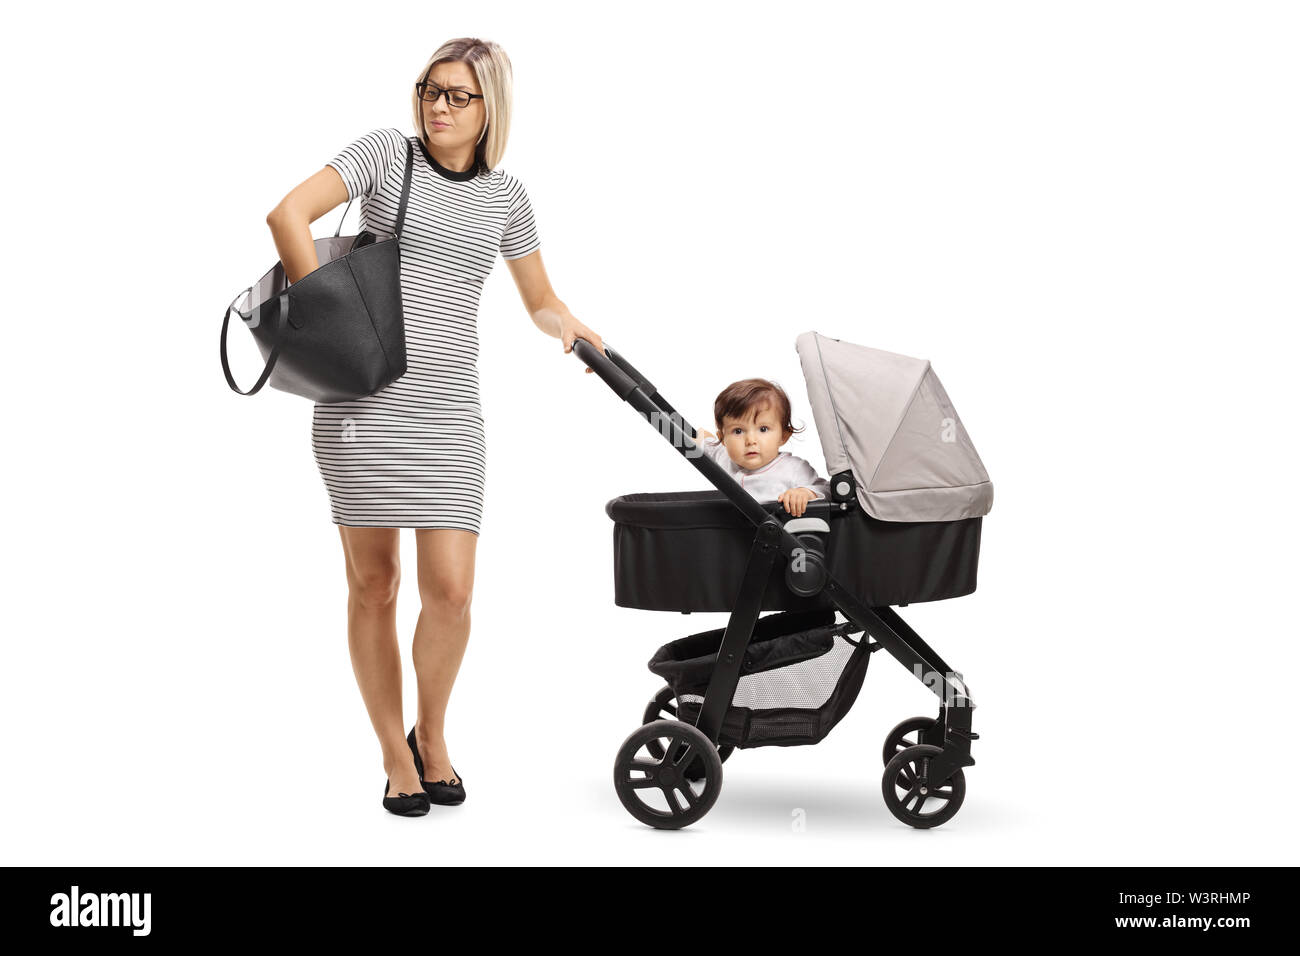 Full length portrait of a mother with a baby in a stroller searching a handbag isolated on white background Stock Photo